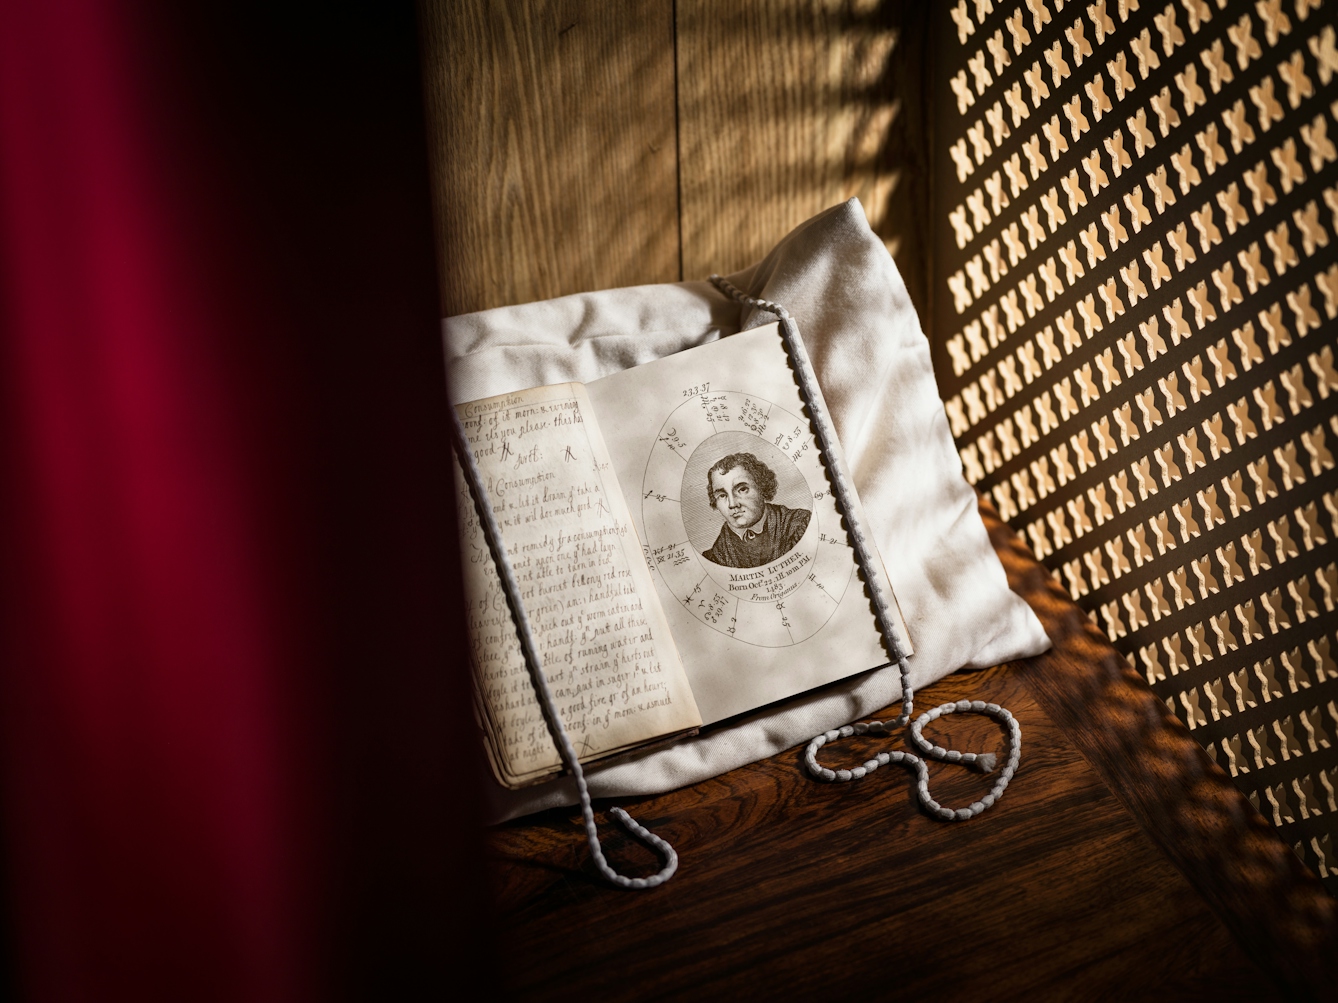 Photograph of a old book resting on a white pillow, in a confessional box. The book is open at a page showing a portrait of Martin Luther, the leader of the Protestant Reformation. To the right is the confessional screen with light streaming through. To the left is the hint of a red curtain.